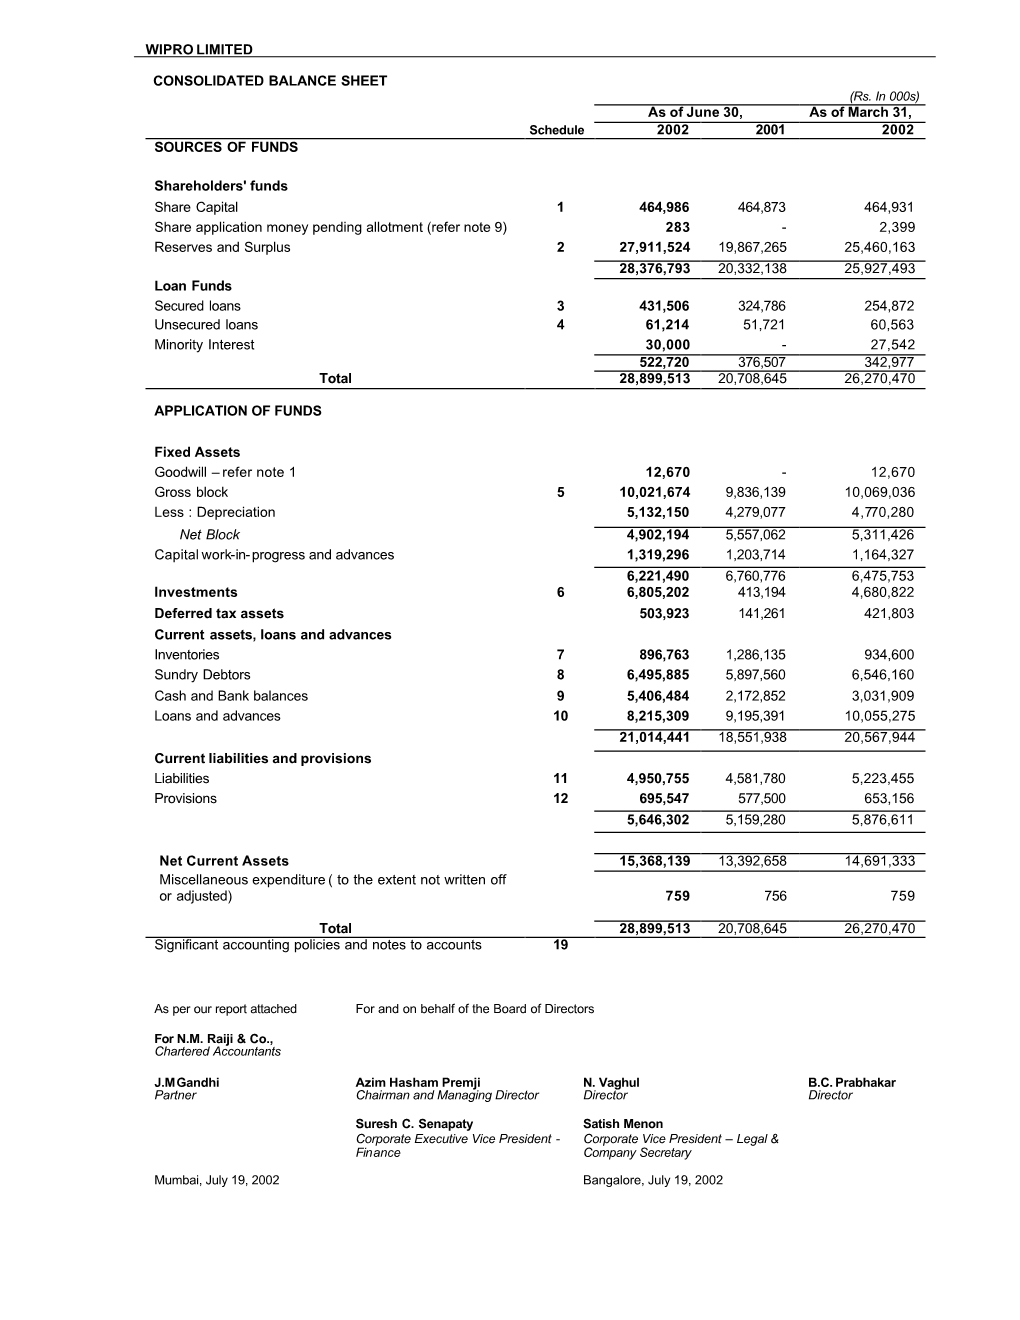 Q1 Results Financial Statements